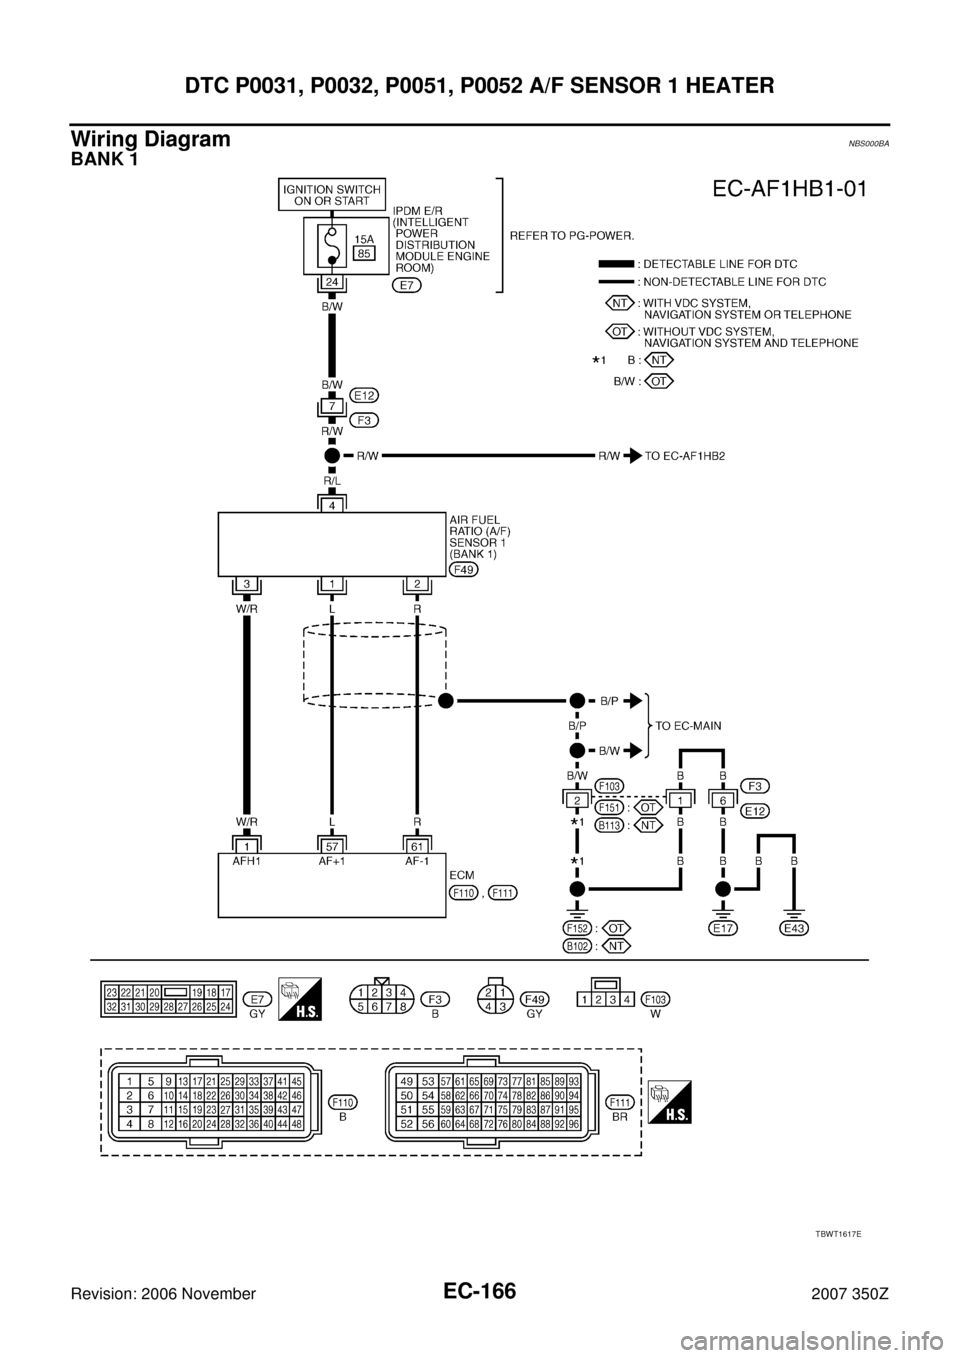 NISSAN 350Z 2007 Z33 Engine Control Owners Manual EC-166
DTC P0031, P0032, P0051, P0052 A/F SENSOR 1 HEATER
Revision: 2006 November2007 350Z
Wiring DiagramNBS000BA
BANK 1
TBWT1617E 